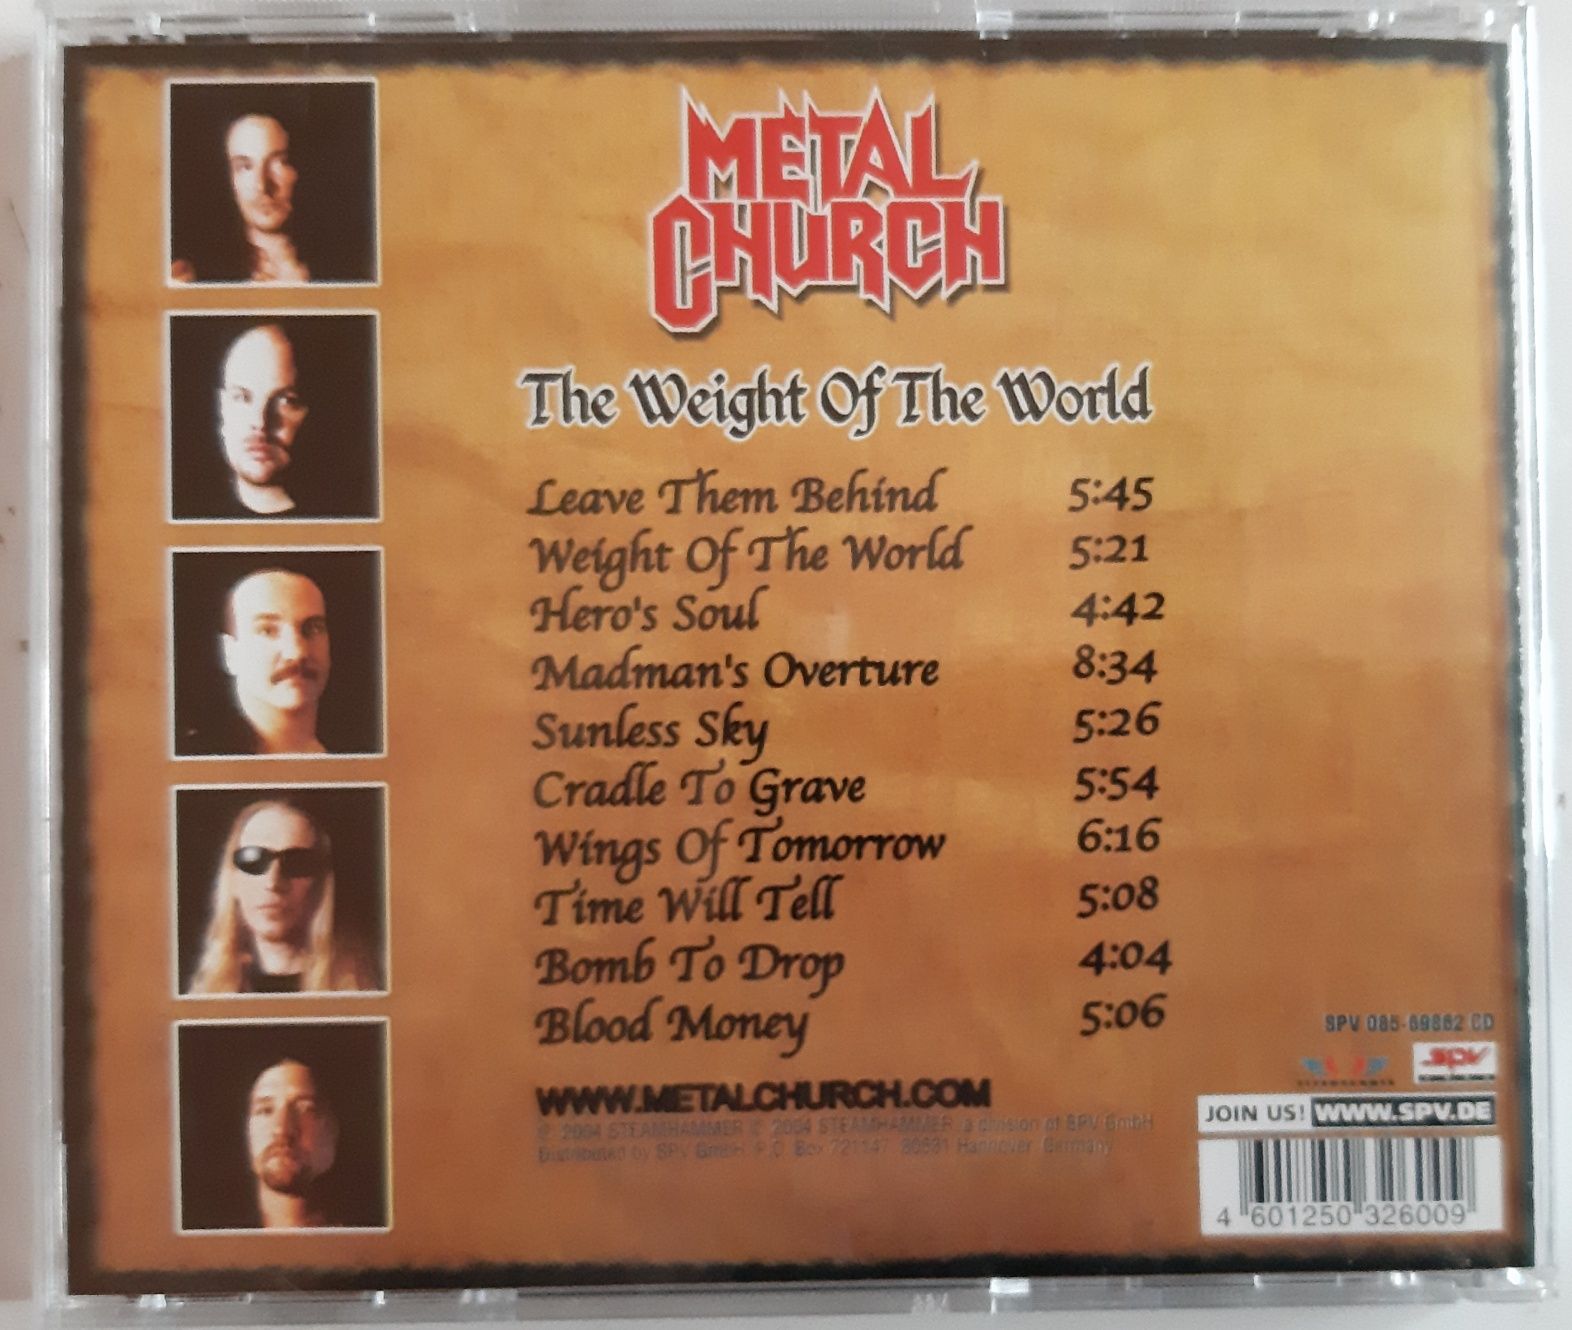 Продам CD Metal Chutch 2004 "The Weight Of The World"